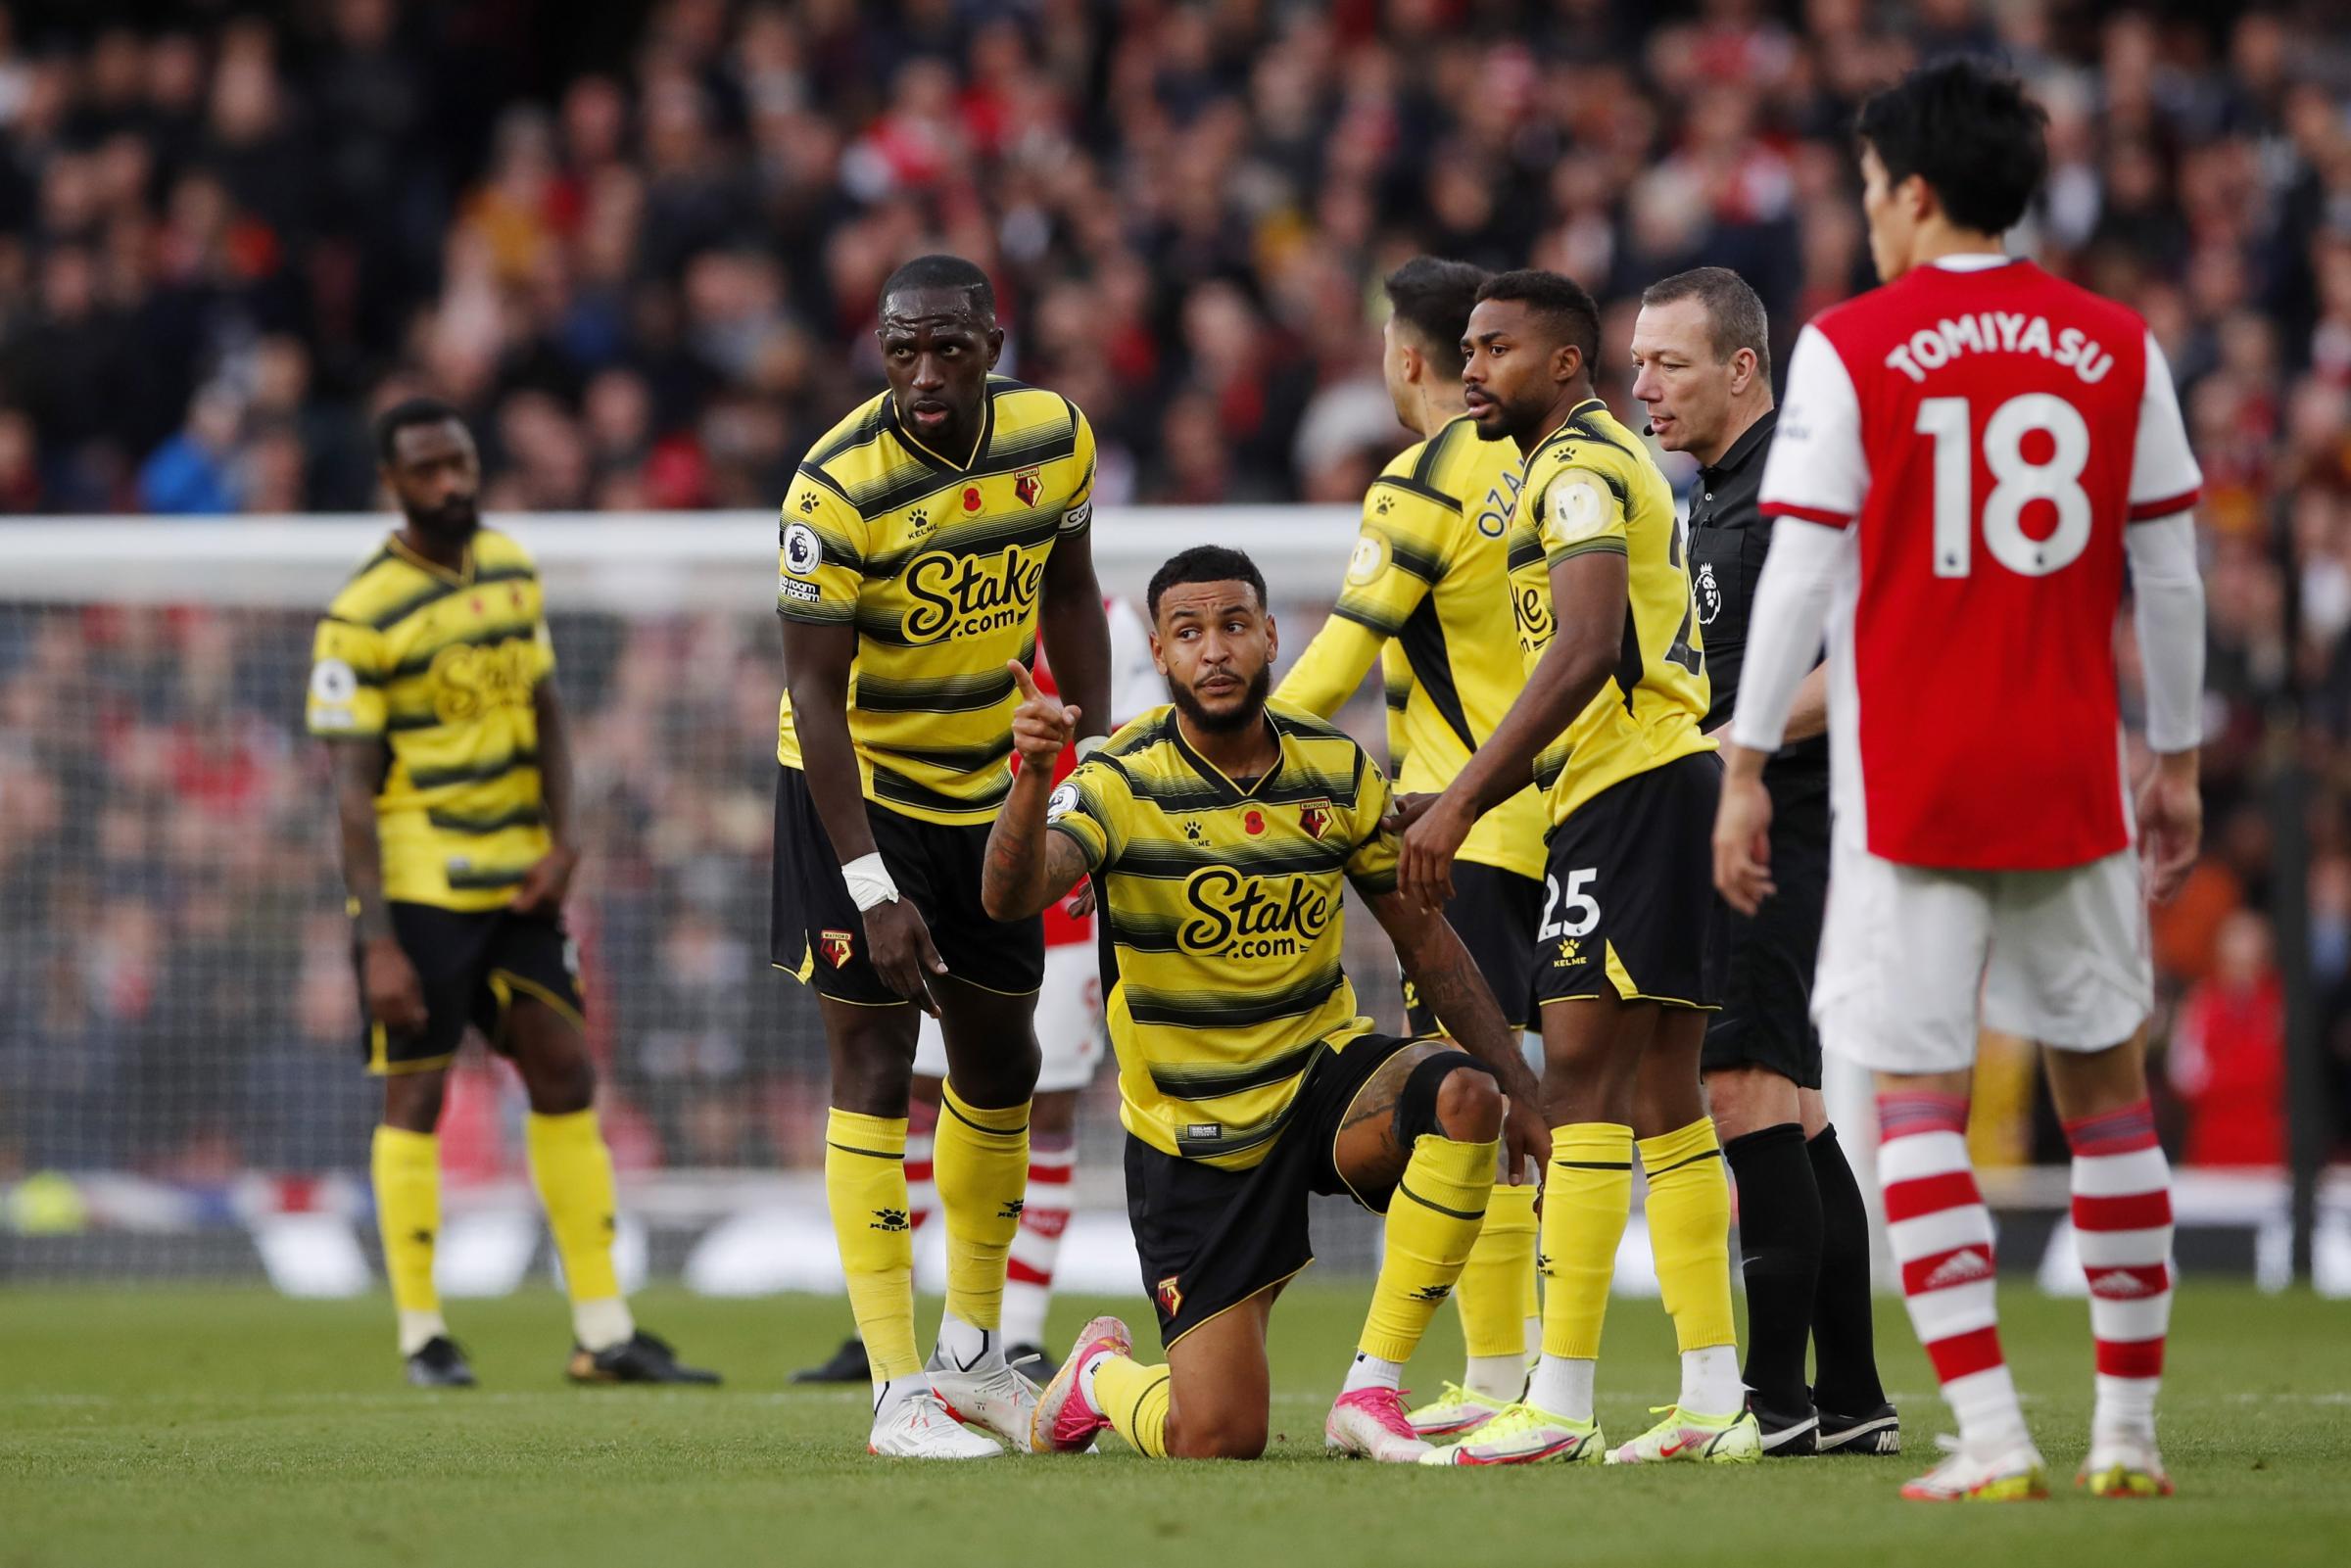 Watford players rated after defeat at Arsenal